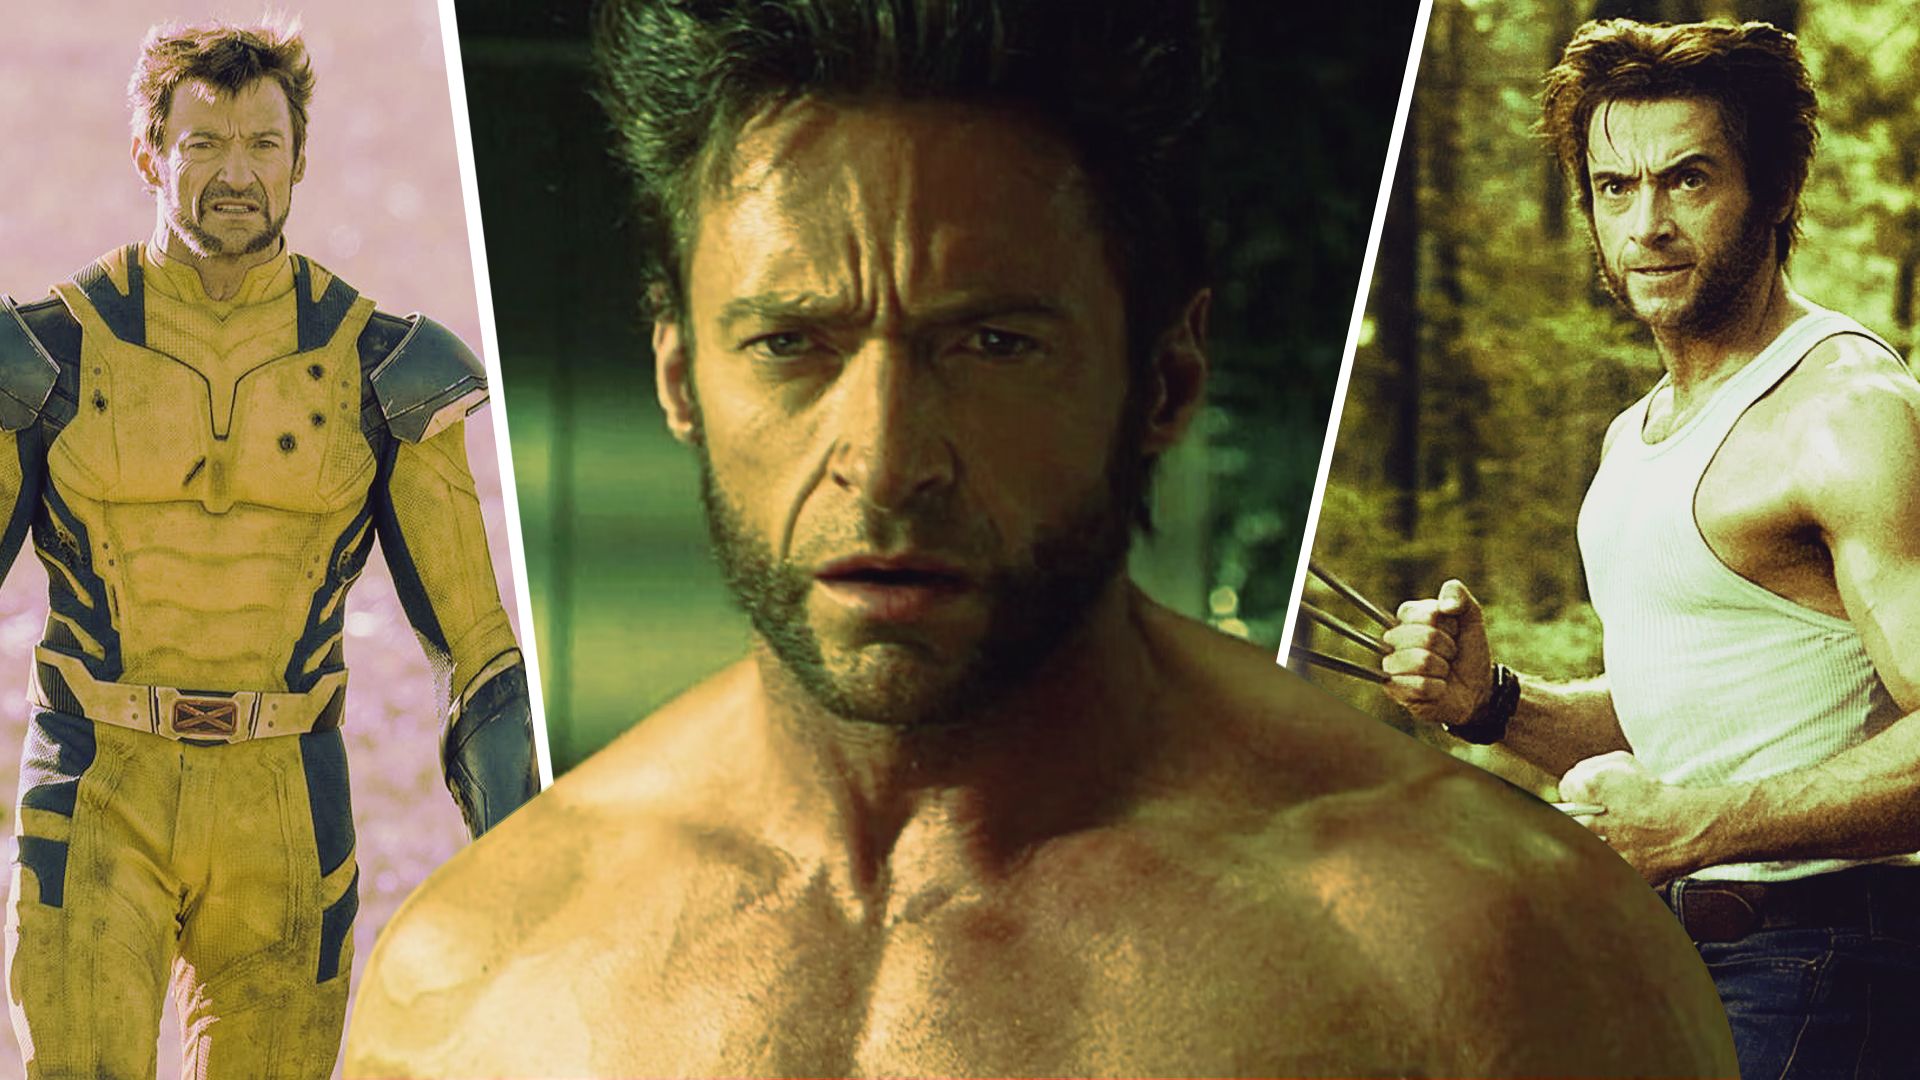 An edit of Hugh Jackman as Wolverine with his claws out in various movies including X-Men and Deadpool & Wolverine